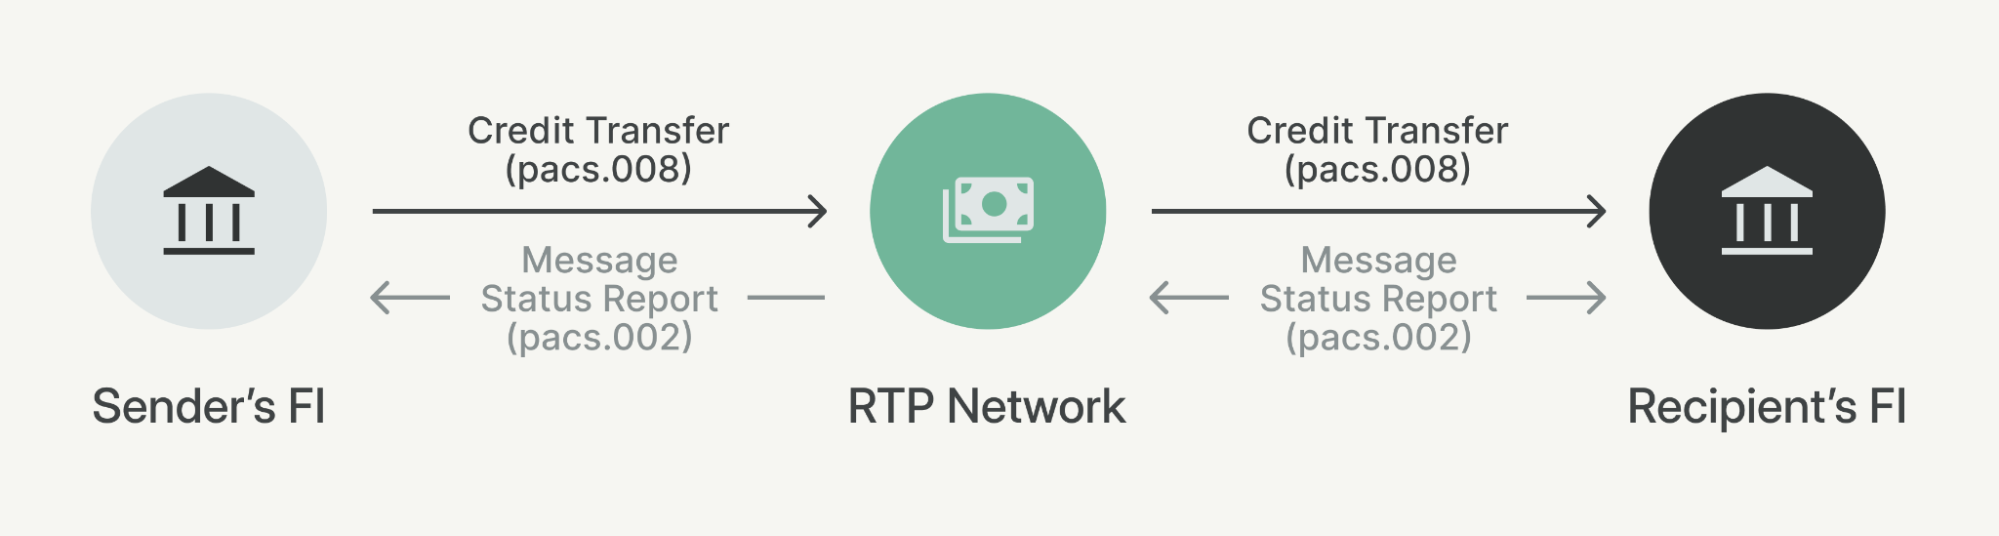   An example RTP Credit Transfer and Message Status Report diagram.